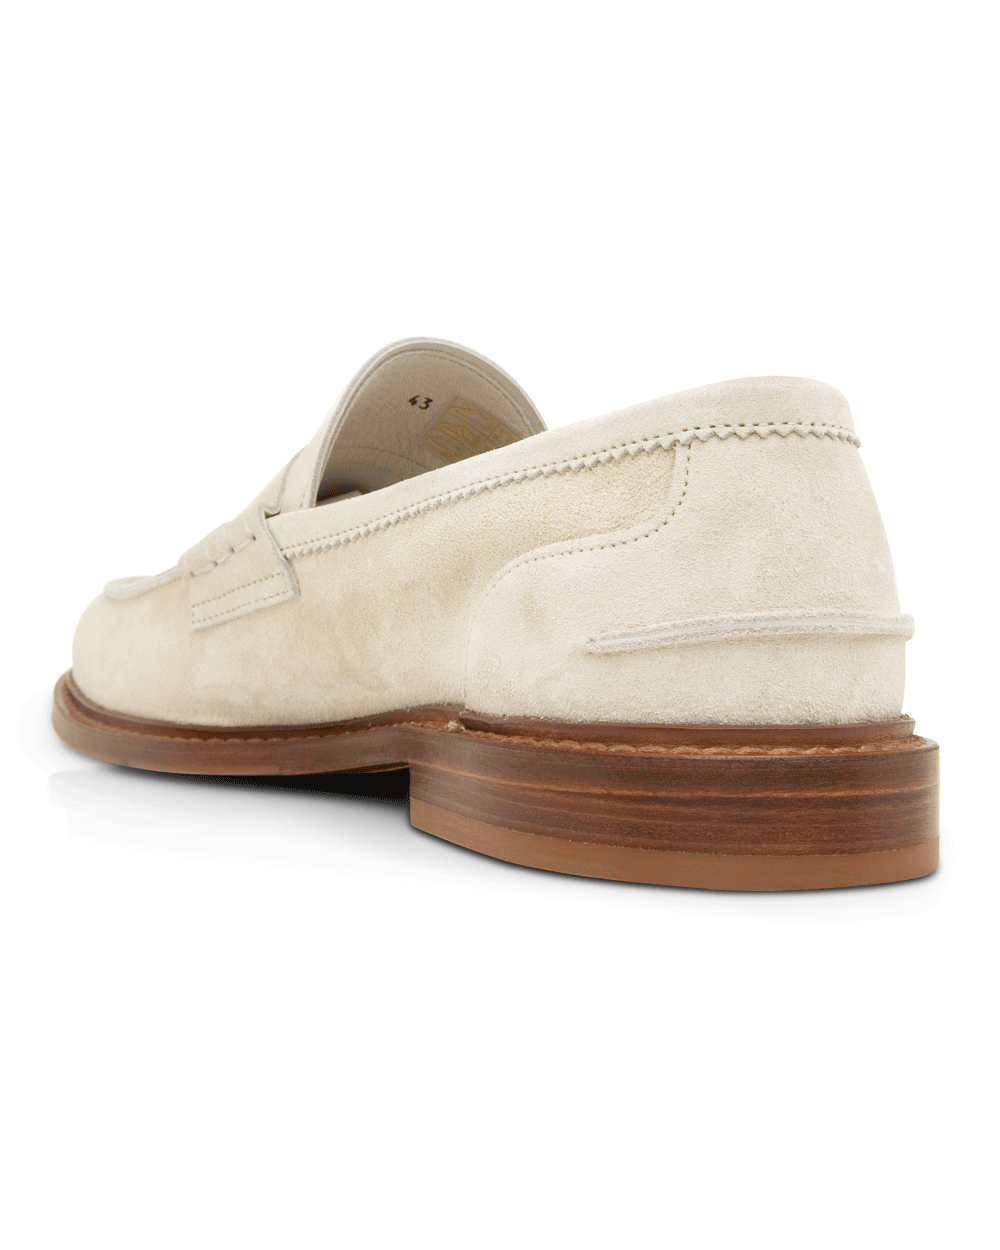 Suede Penny Loafer in White